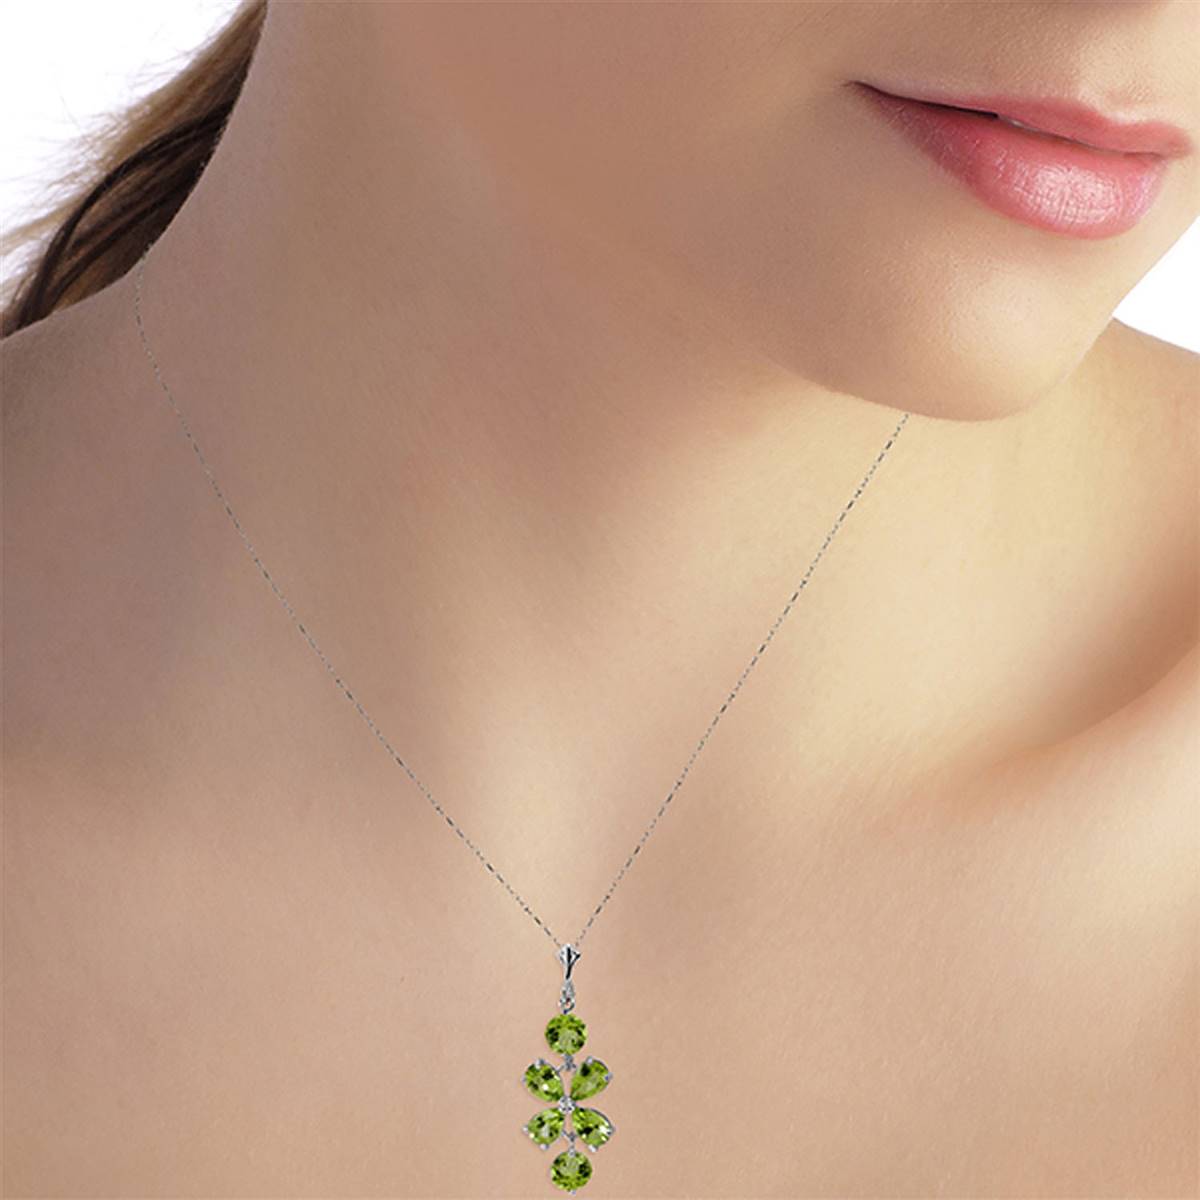 3.15 Carat 14K Solid White Gold Incidental Souls Peridot Necklace